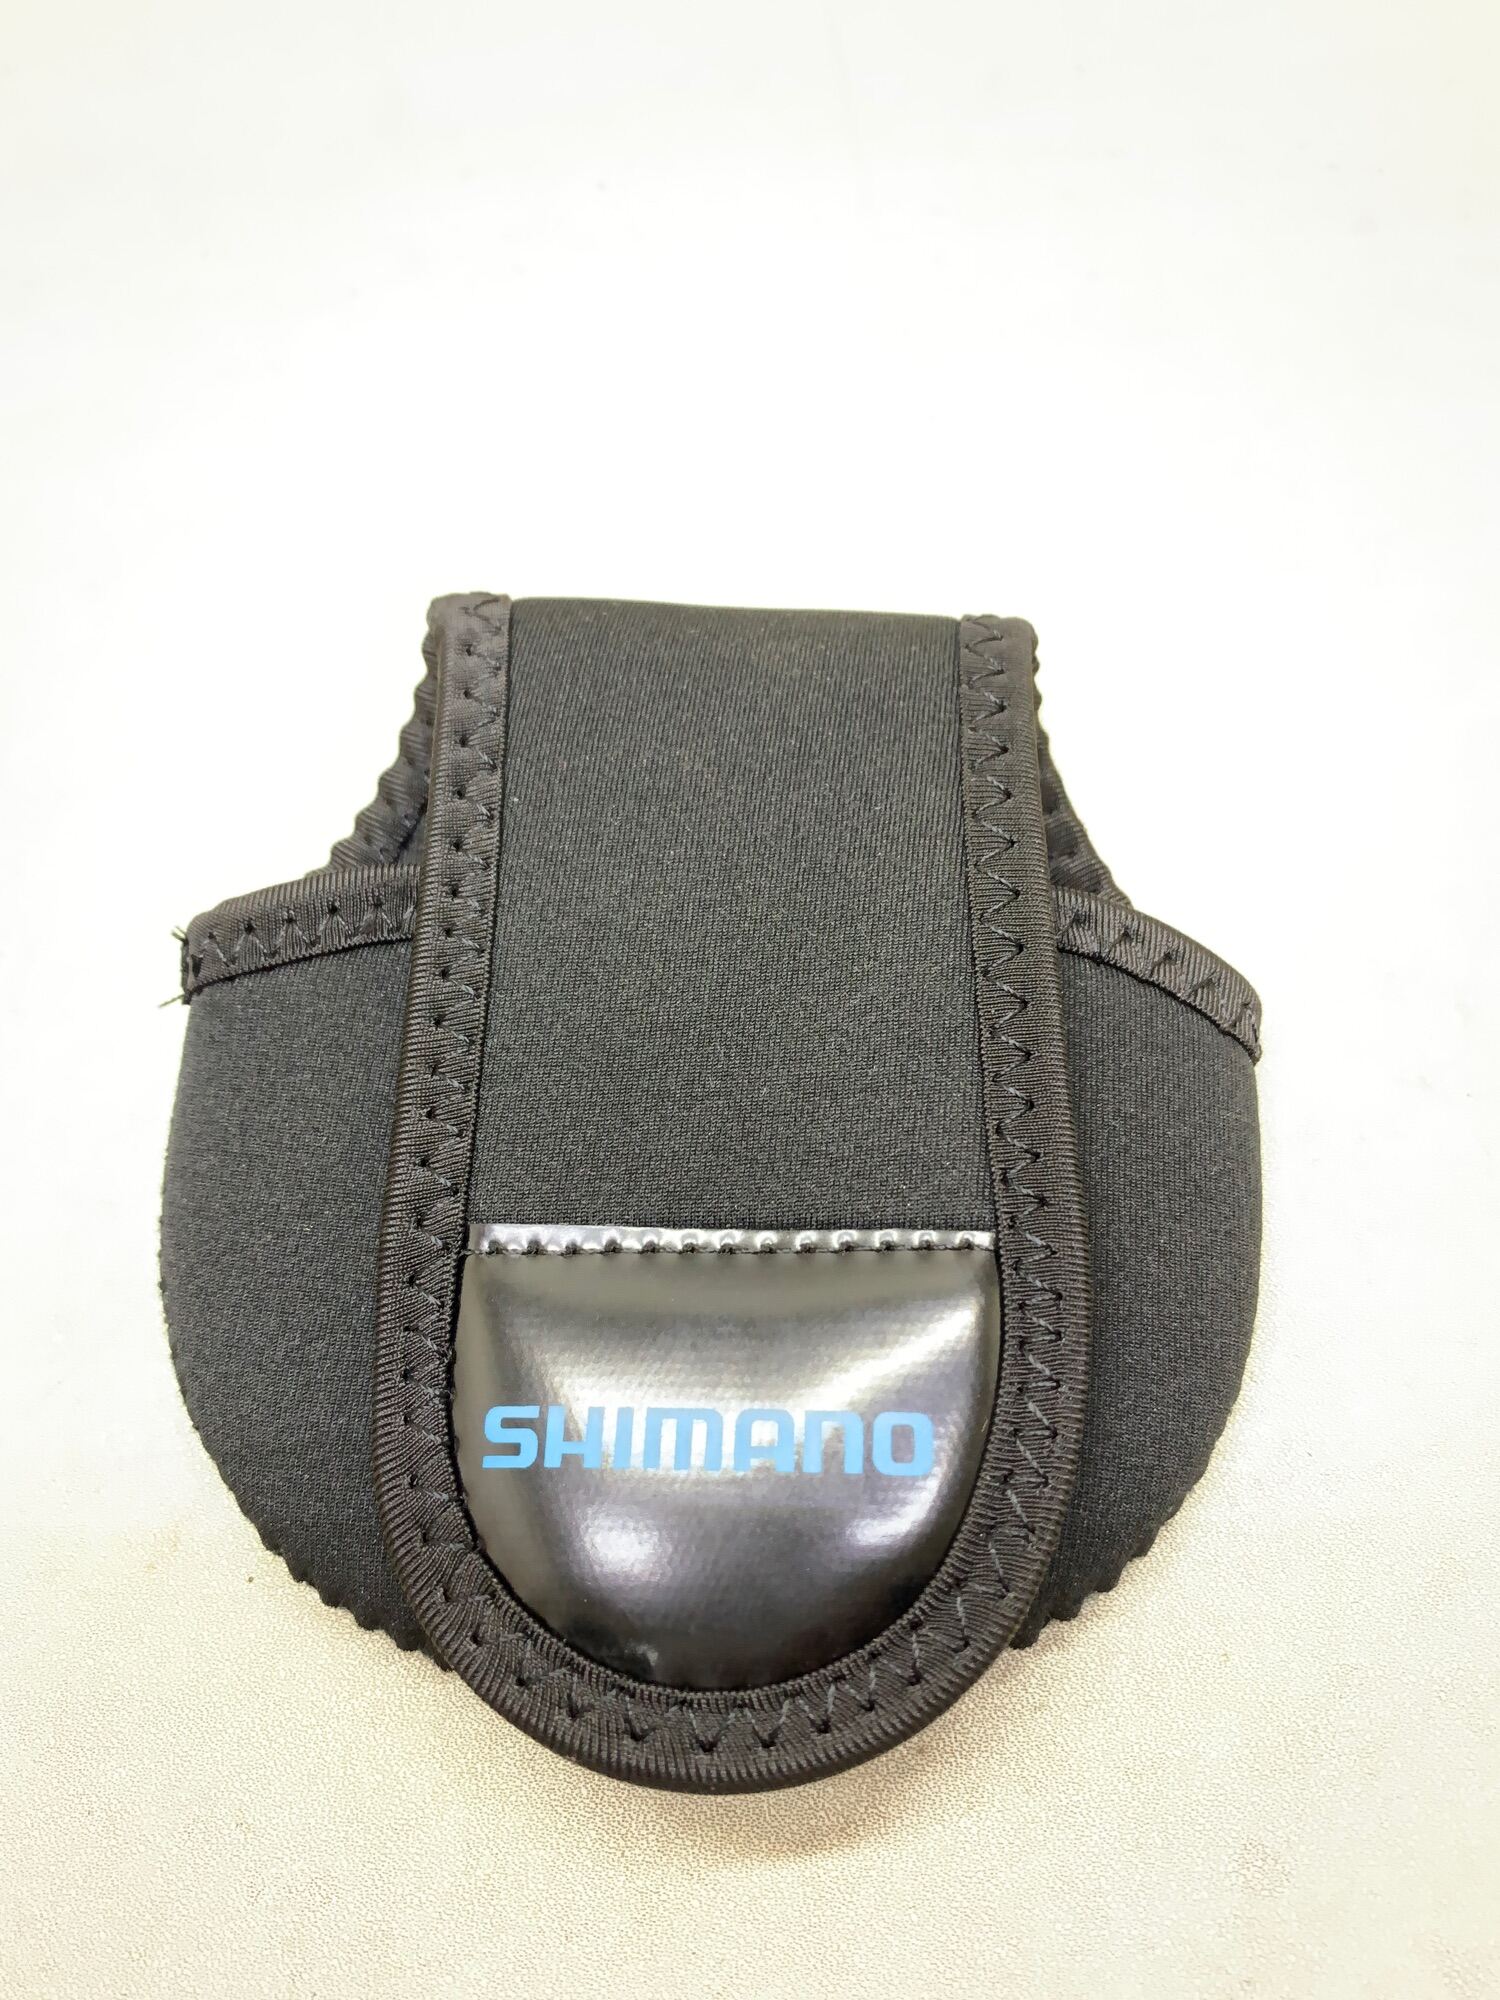 Jual Sarung Reel BC Shmano / Baitcasting reel pouch / Reel cover